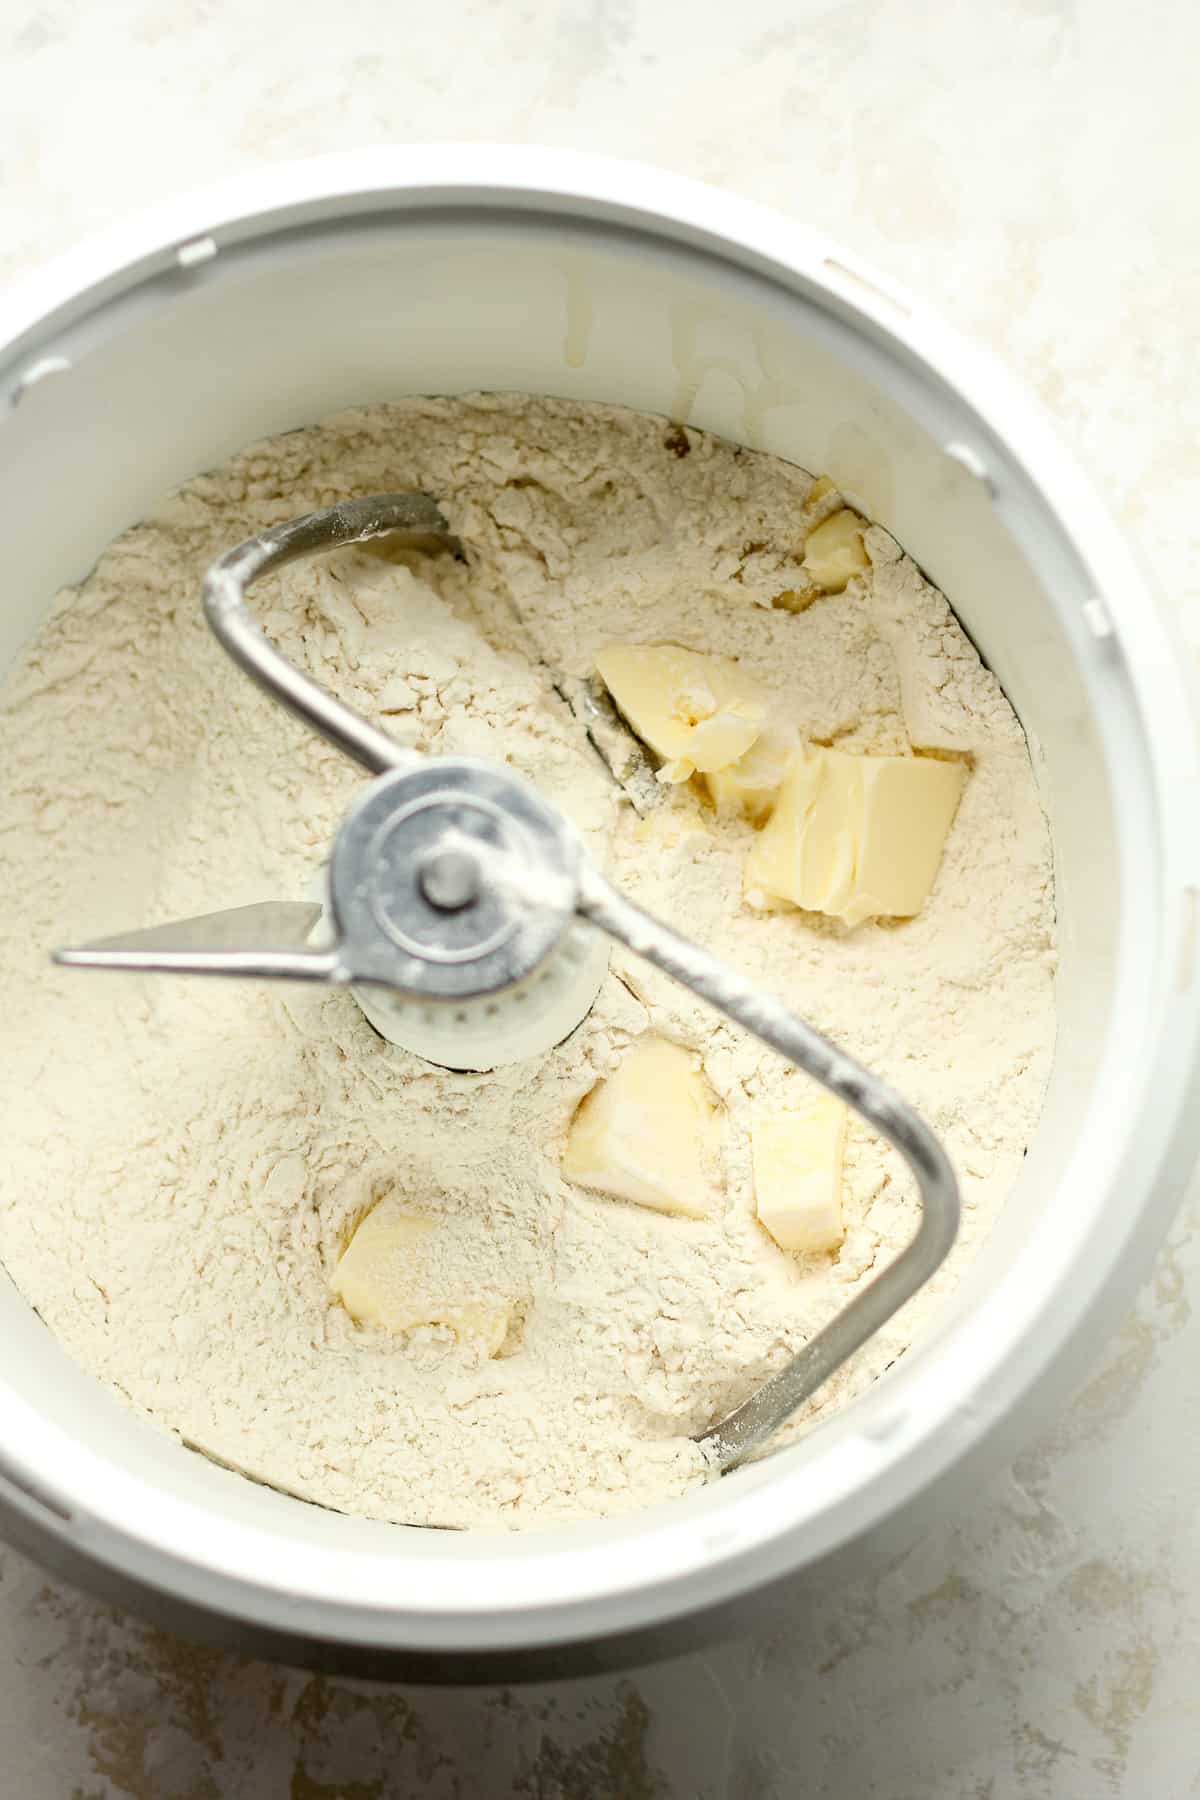 The mixer with flour plus butter.